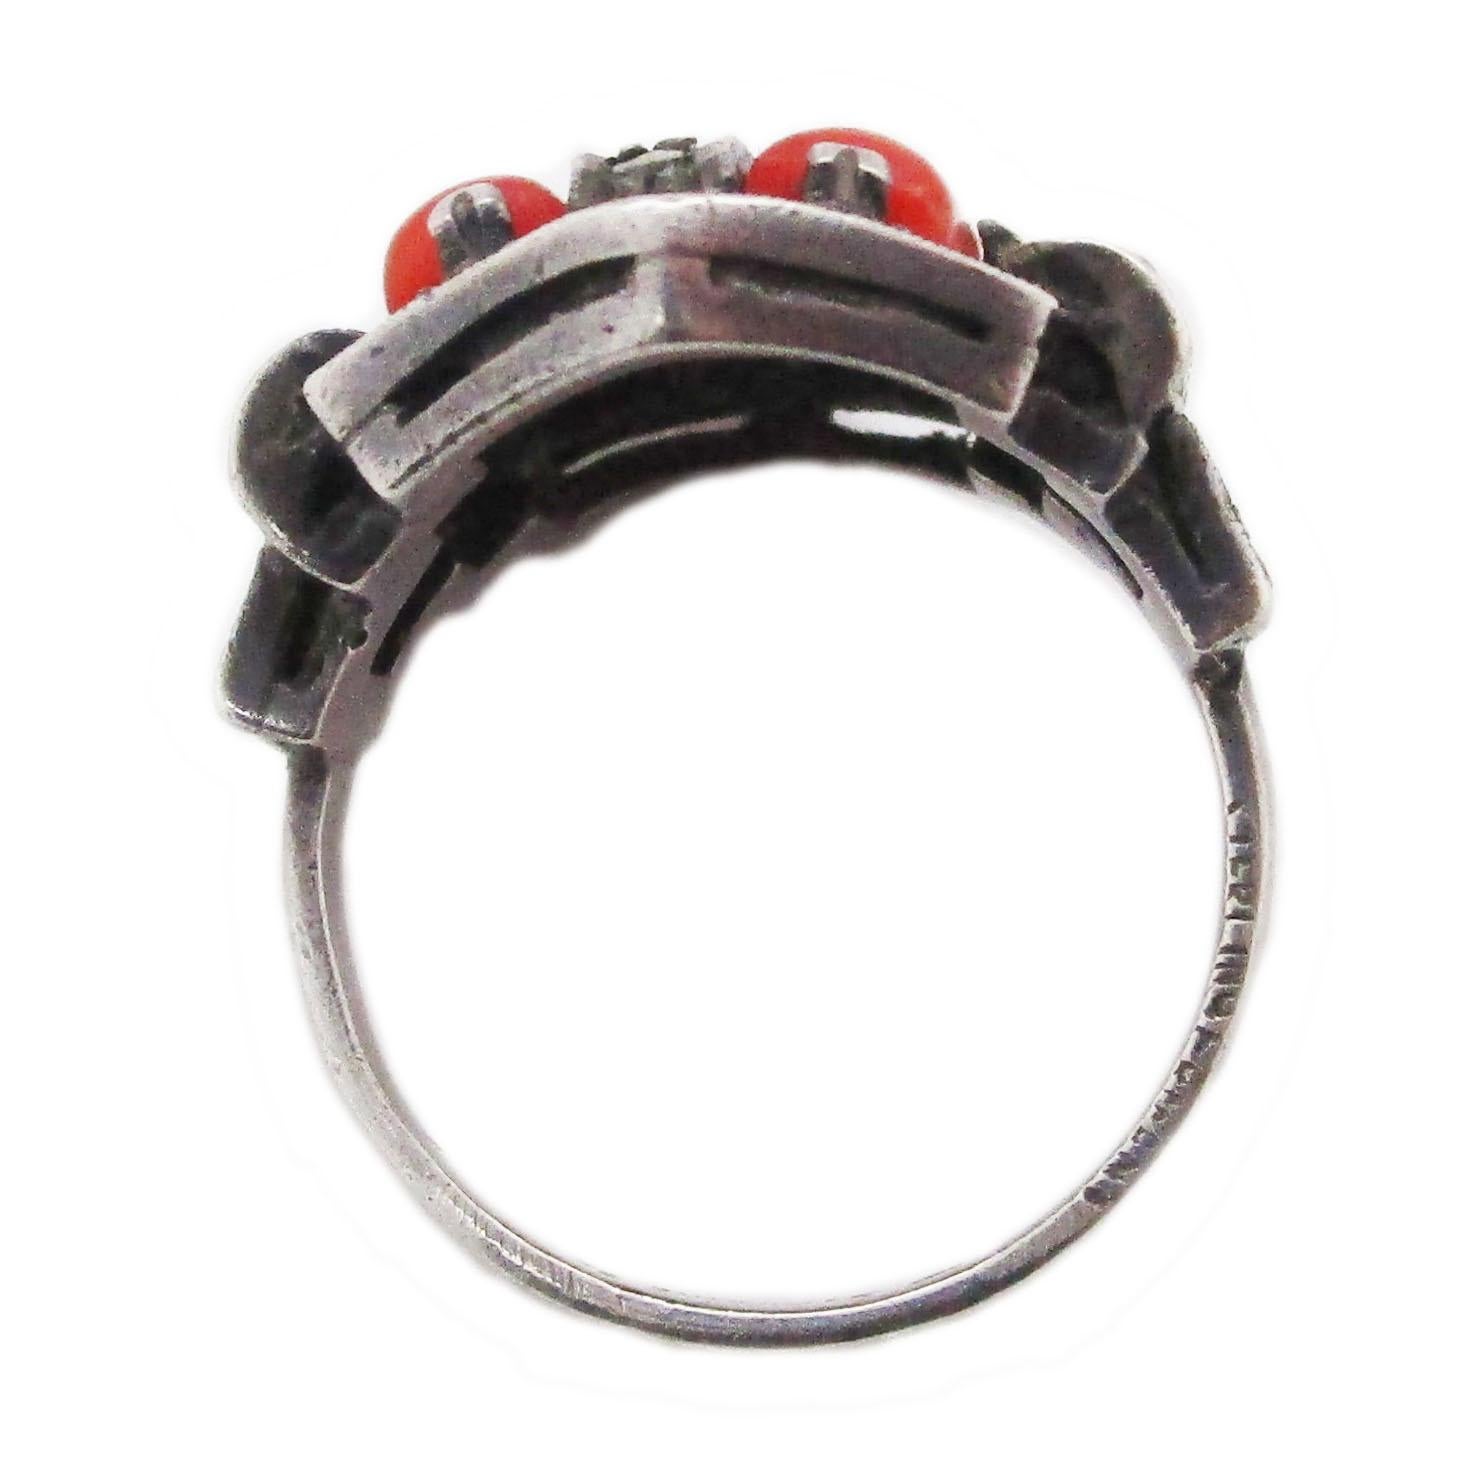 Uncut Theodore Fahrner Art Deco Sterling Silver Marcasite and Red Coral Ring